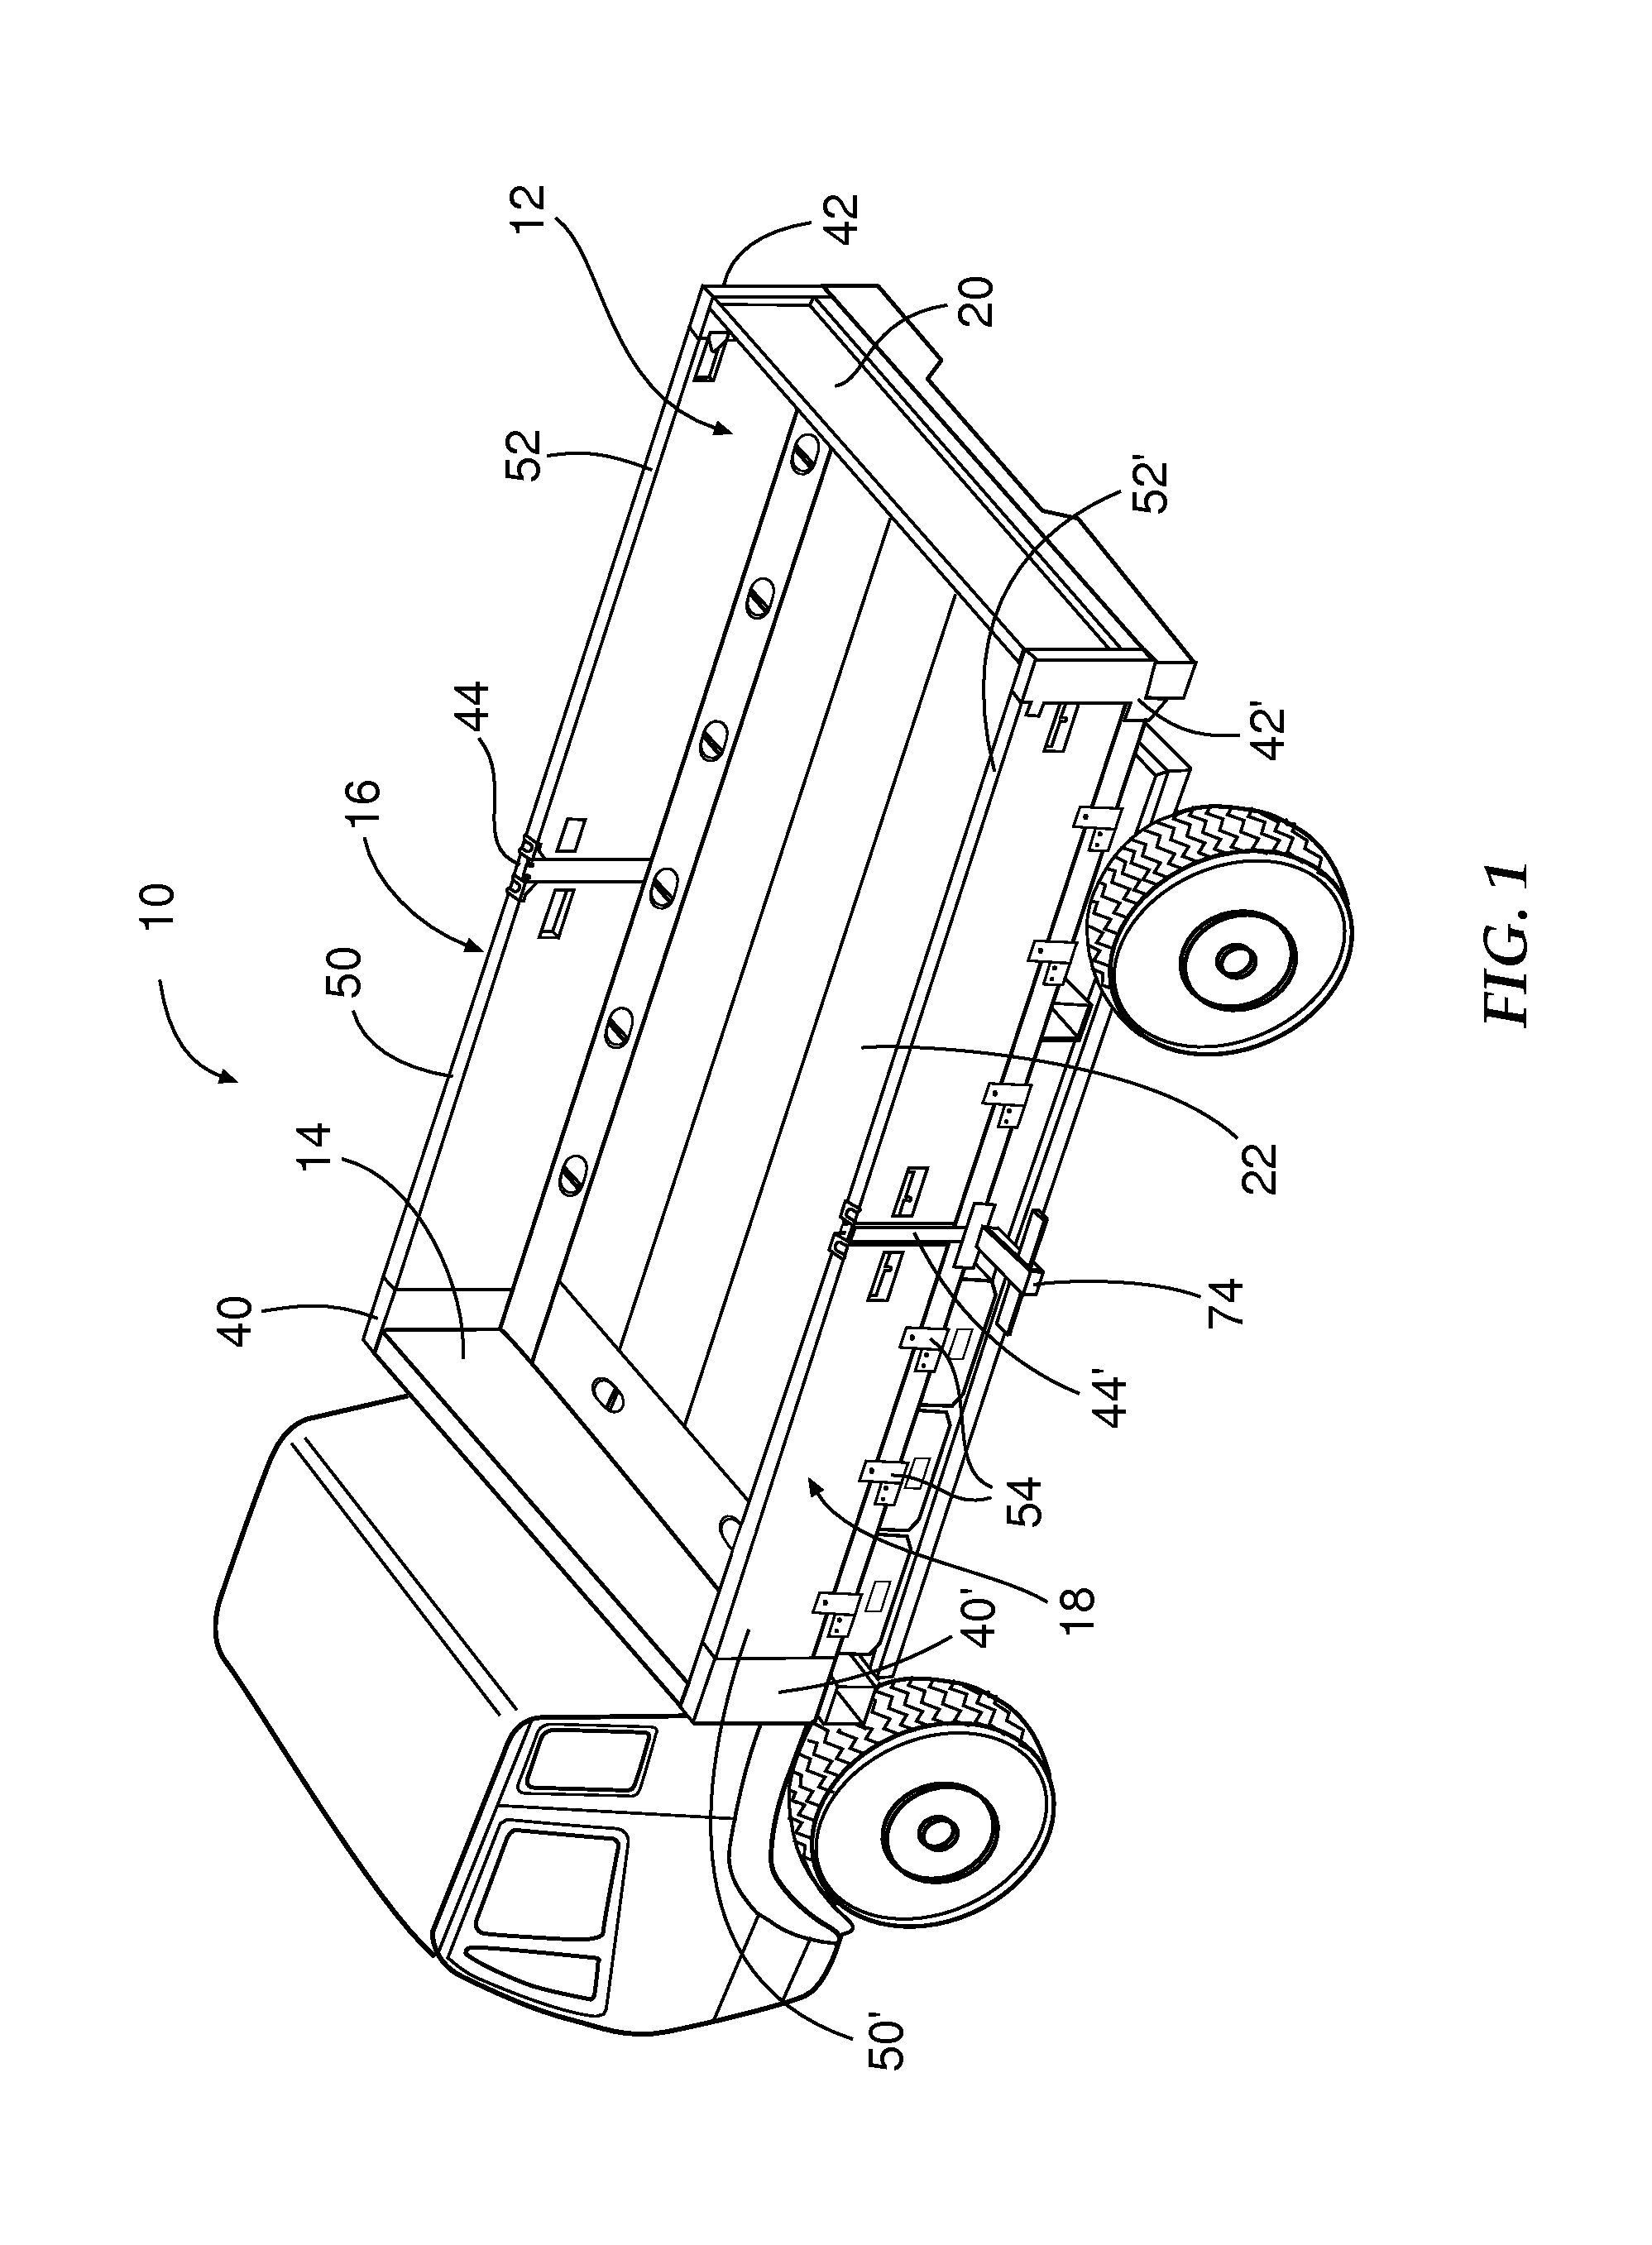 Cargo bed structure comprising fiber reinforced polymer components